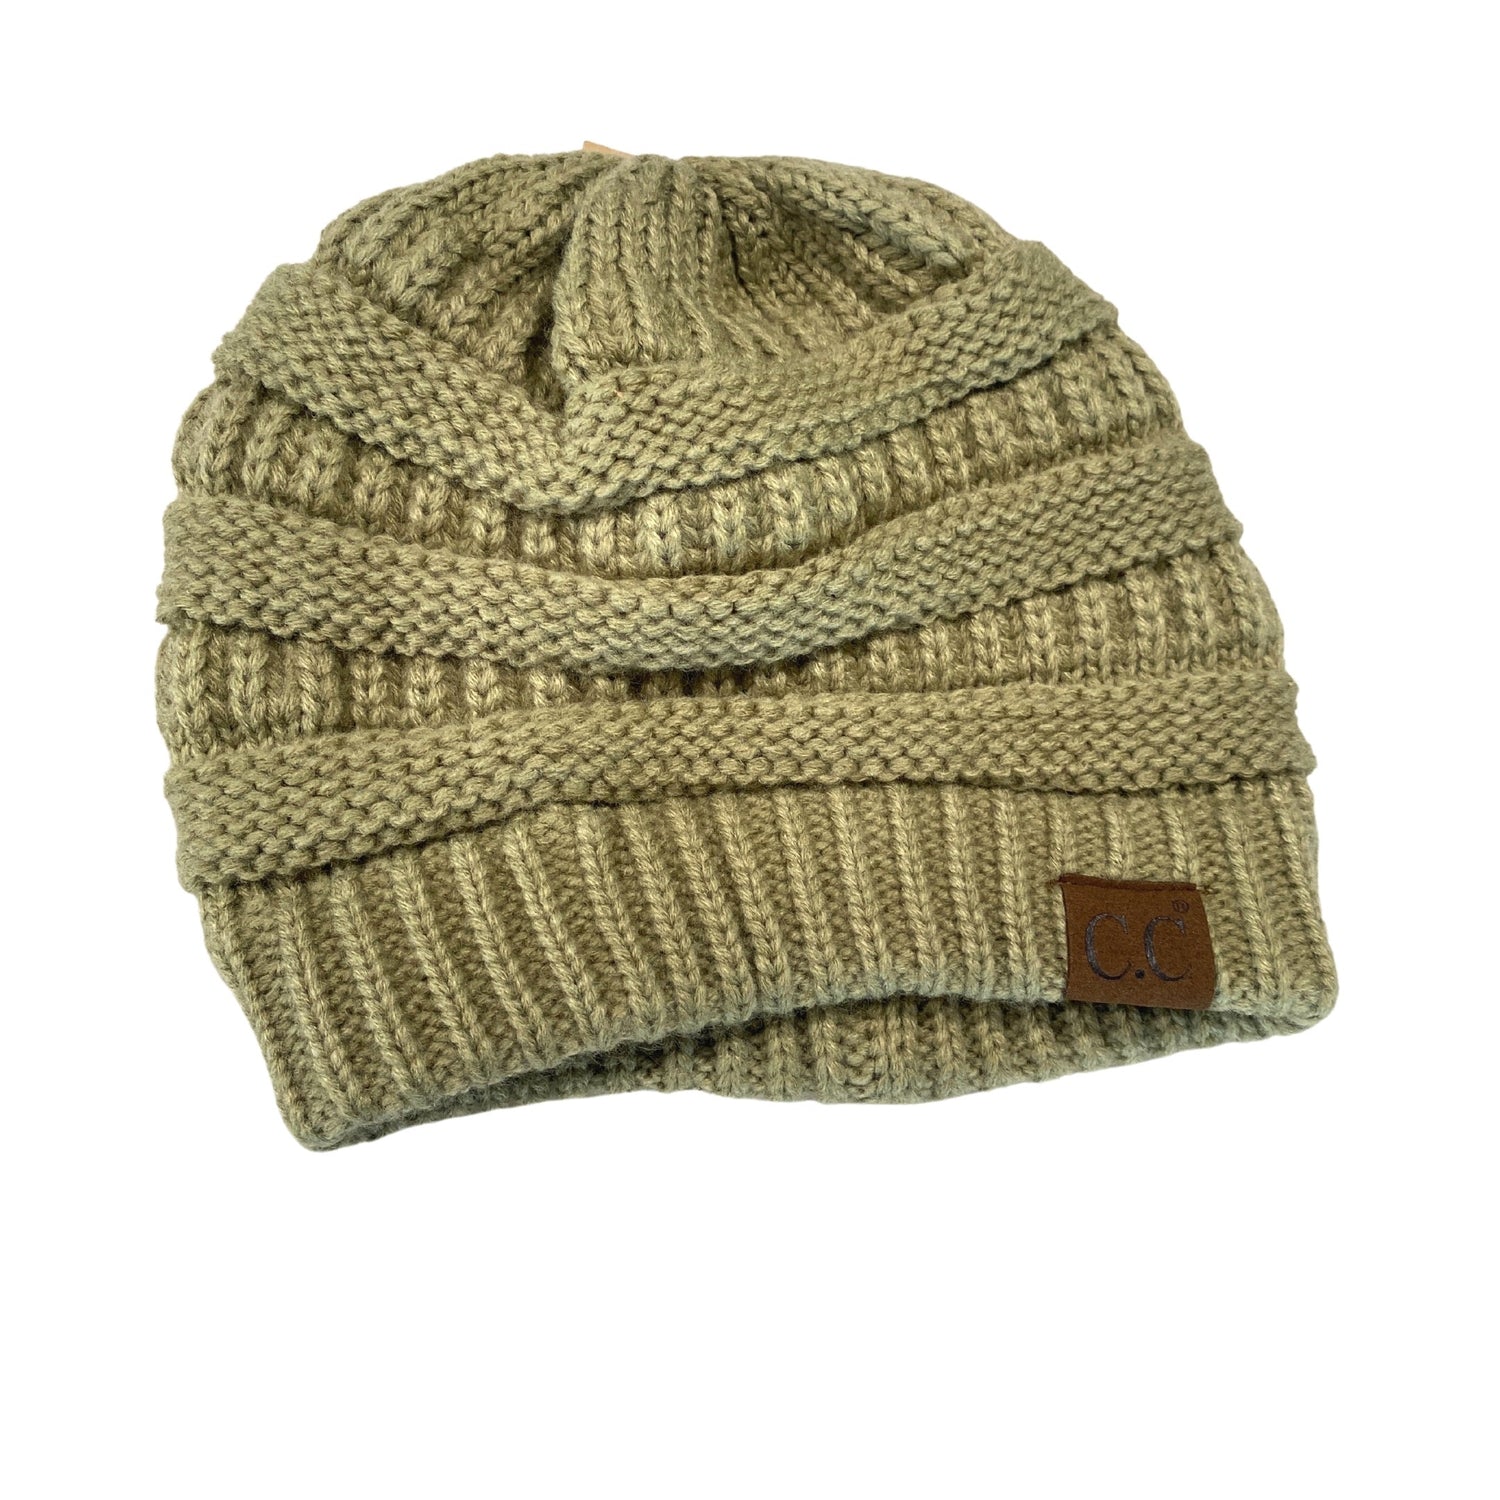 CC Exclusive Knit Beanie- Multiple Colors Available - Hair With A Cause   Oncology Boutique     